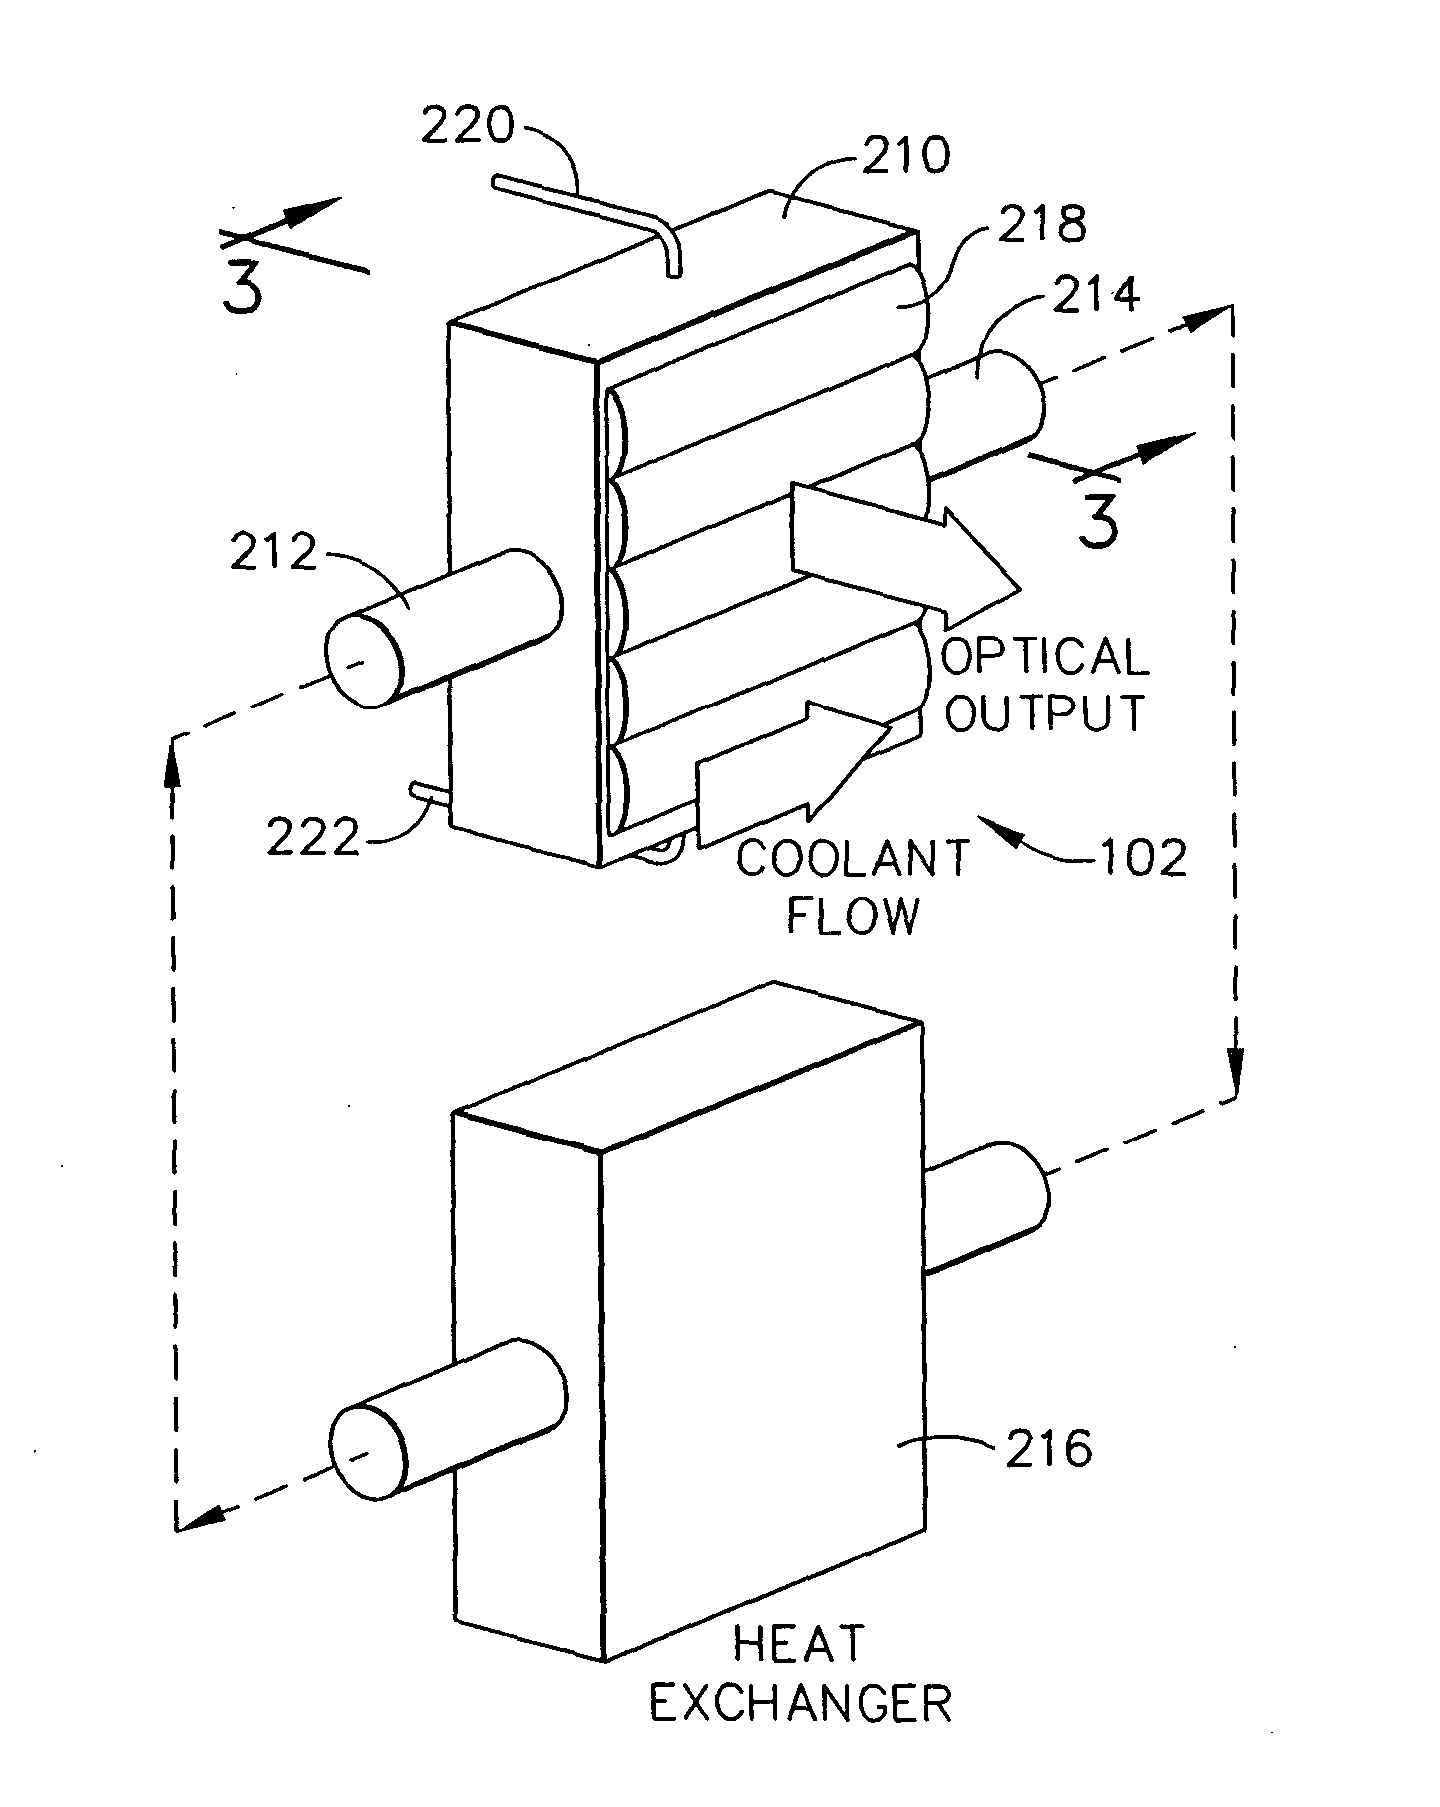 Immersion-cooled monolithic laser diode array and method of manufacturing the same